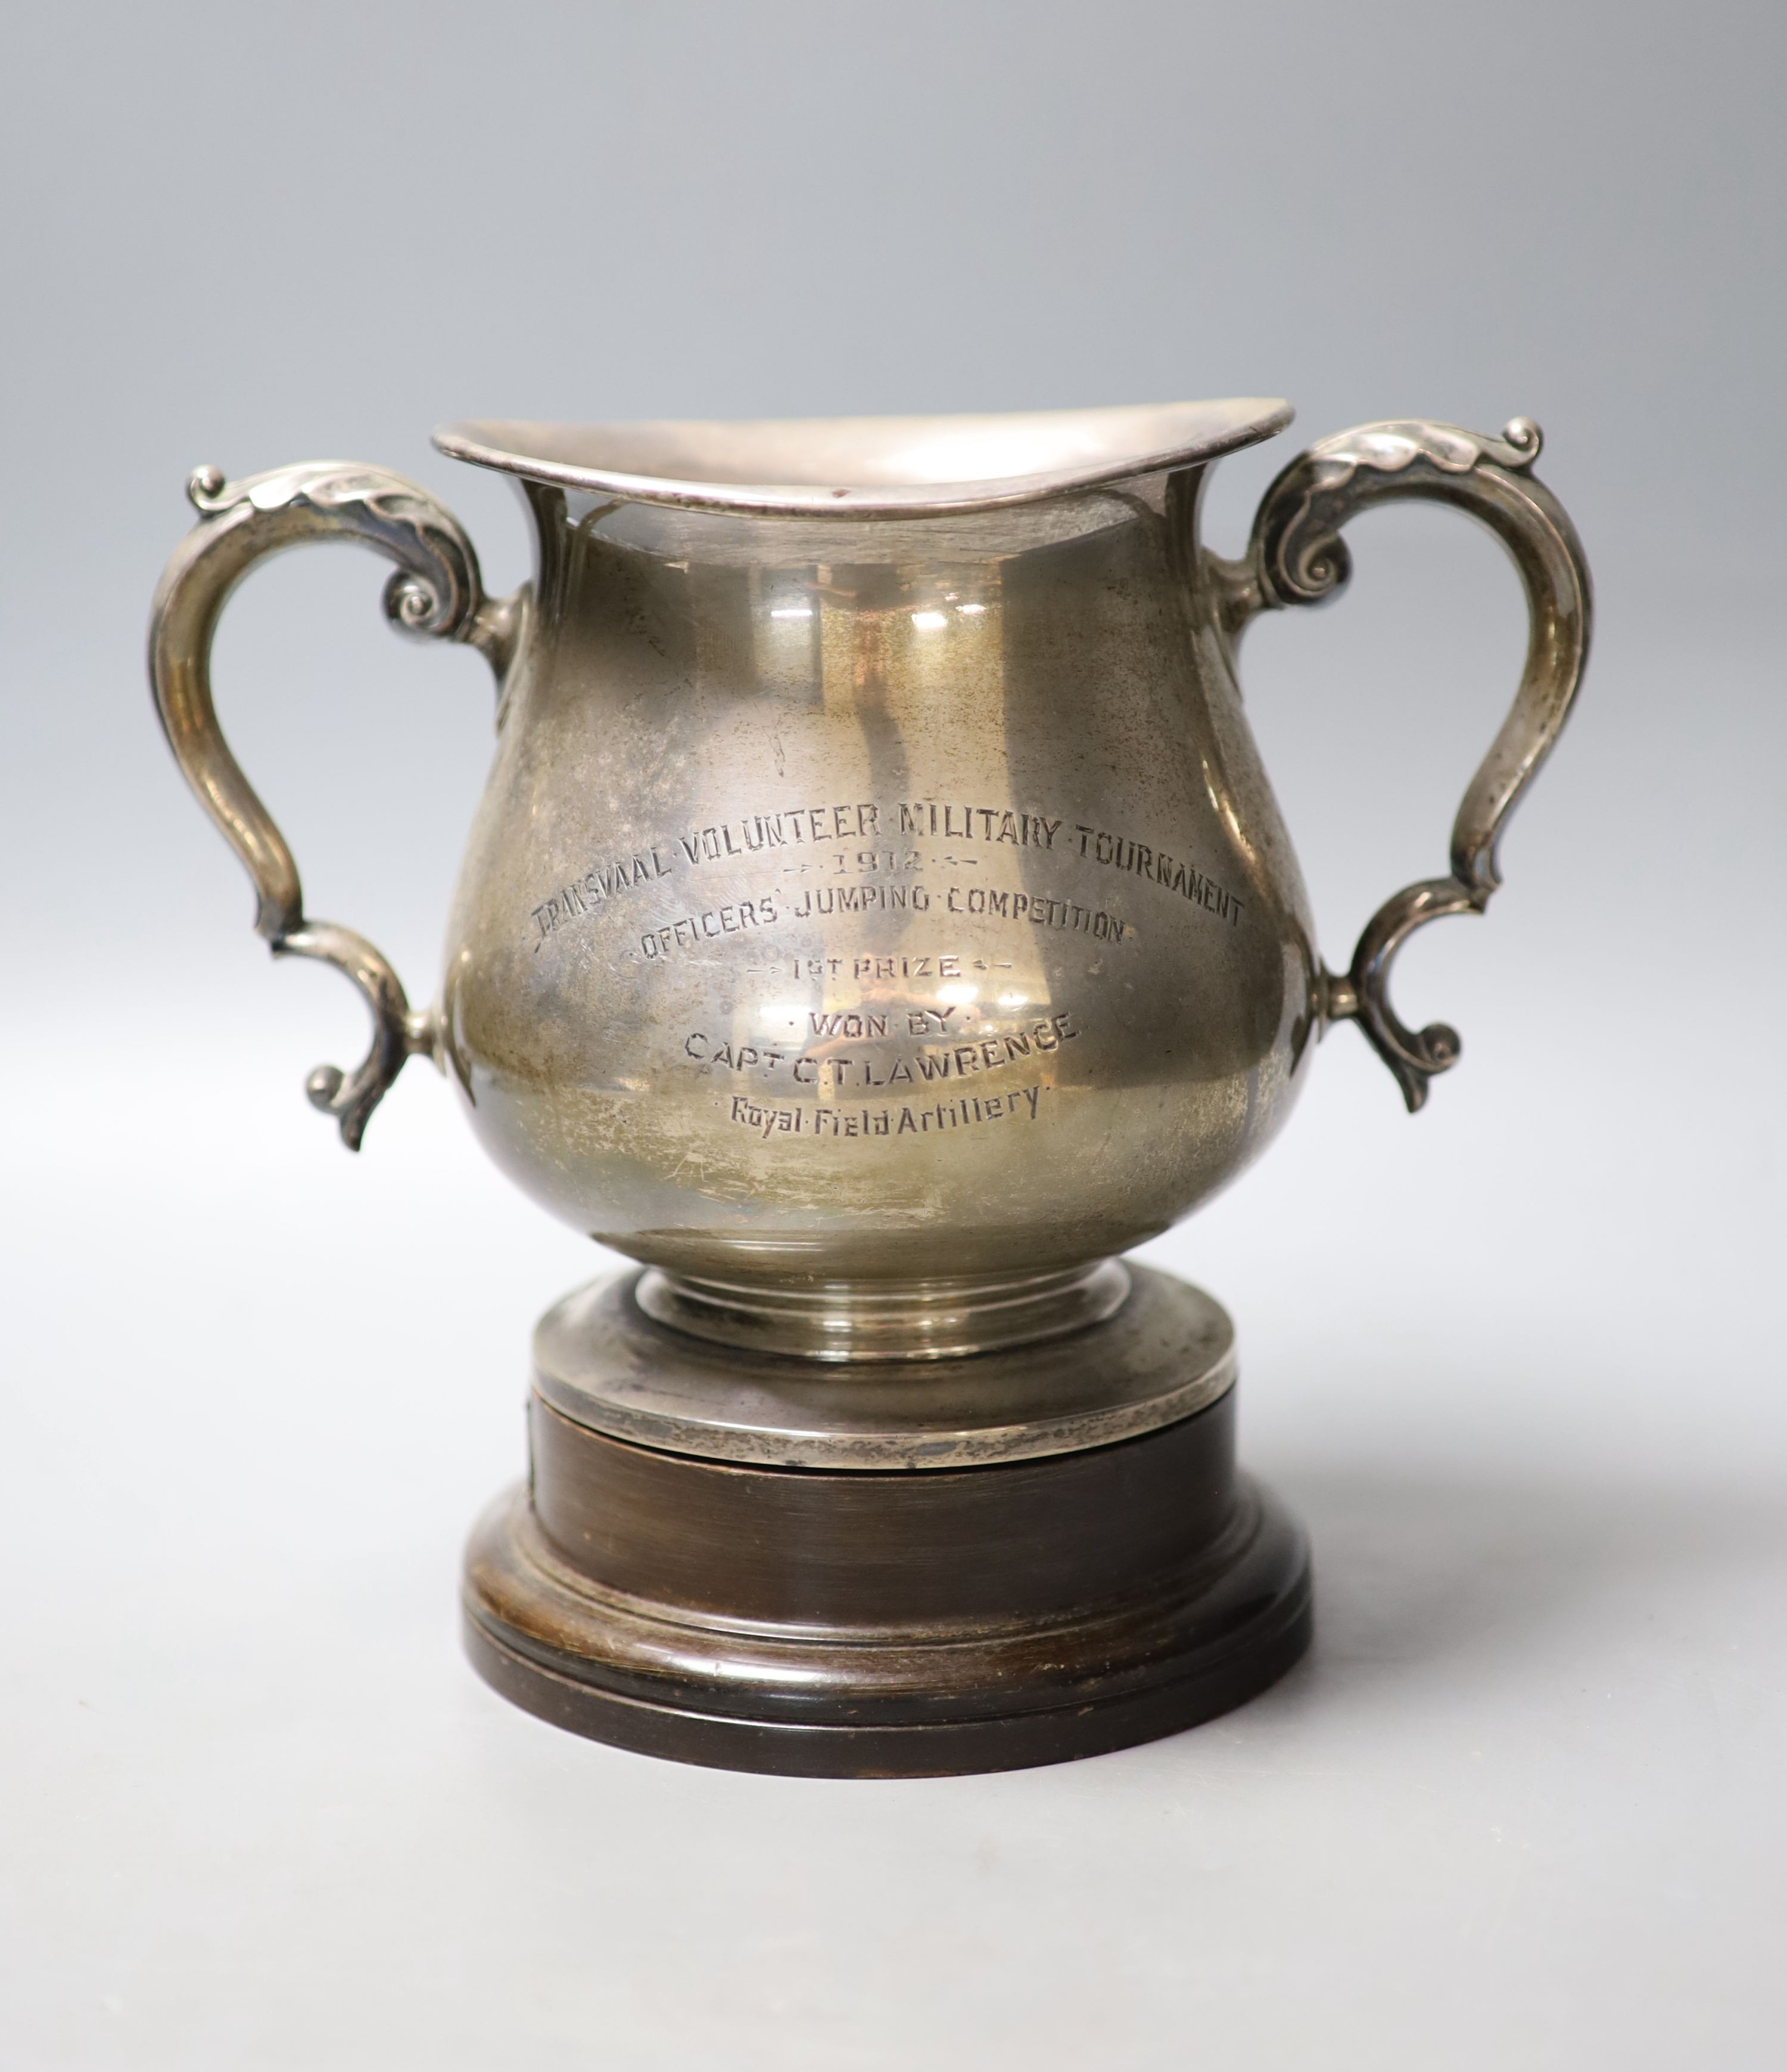 An Edwardian silver two handled presentation trophy cup, with later engraved inscription relating to the 'Transvaal Volunteer Military Tournament' Mappin & Webb, London, 1908, height 15.6cm, 21.5oz, on a wooden socle.